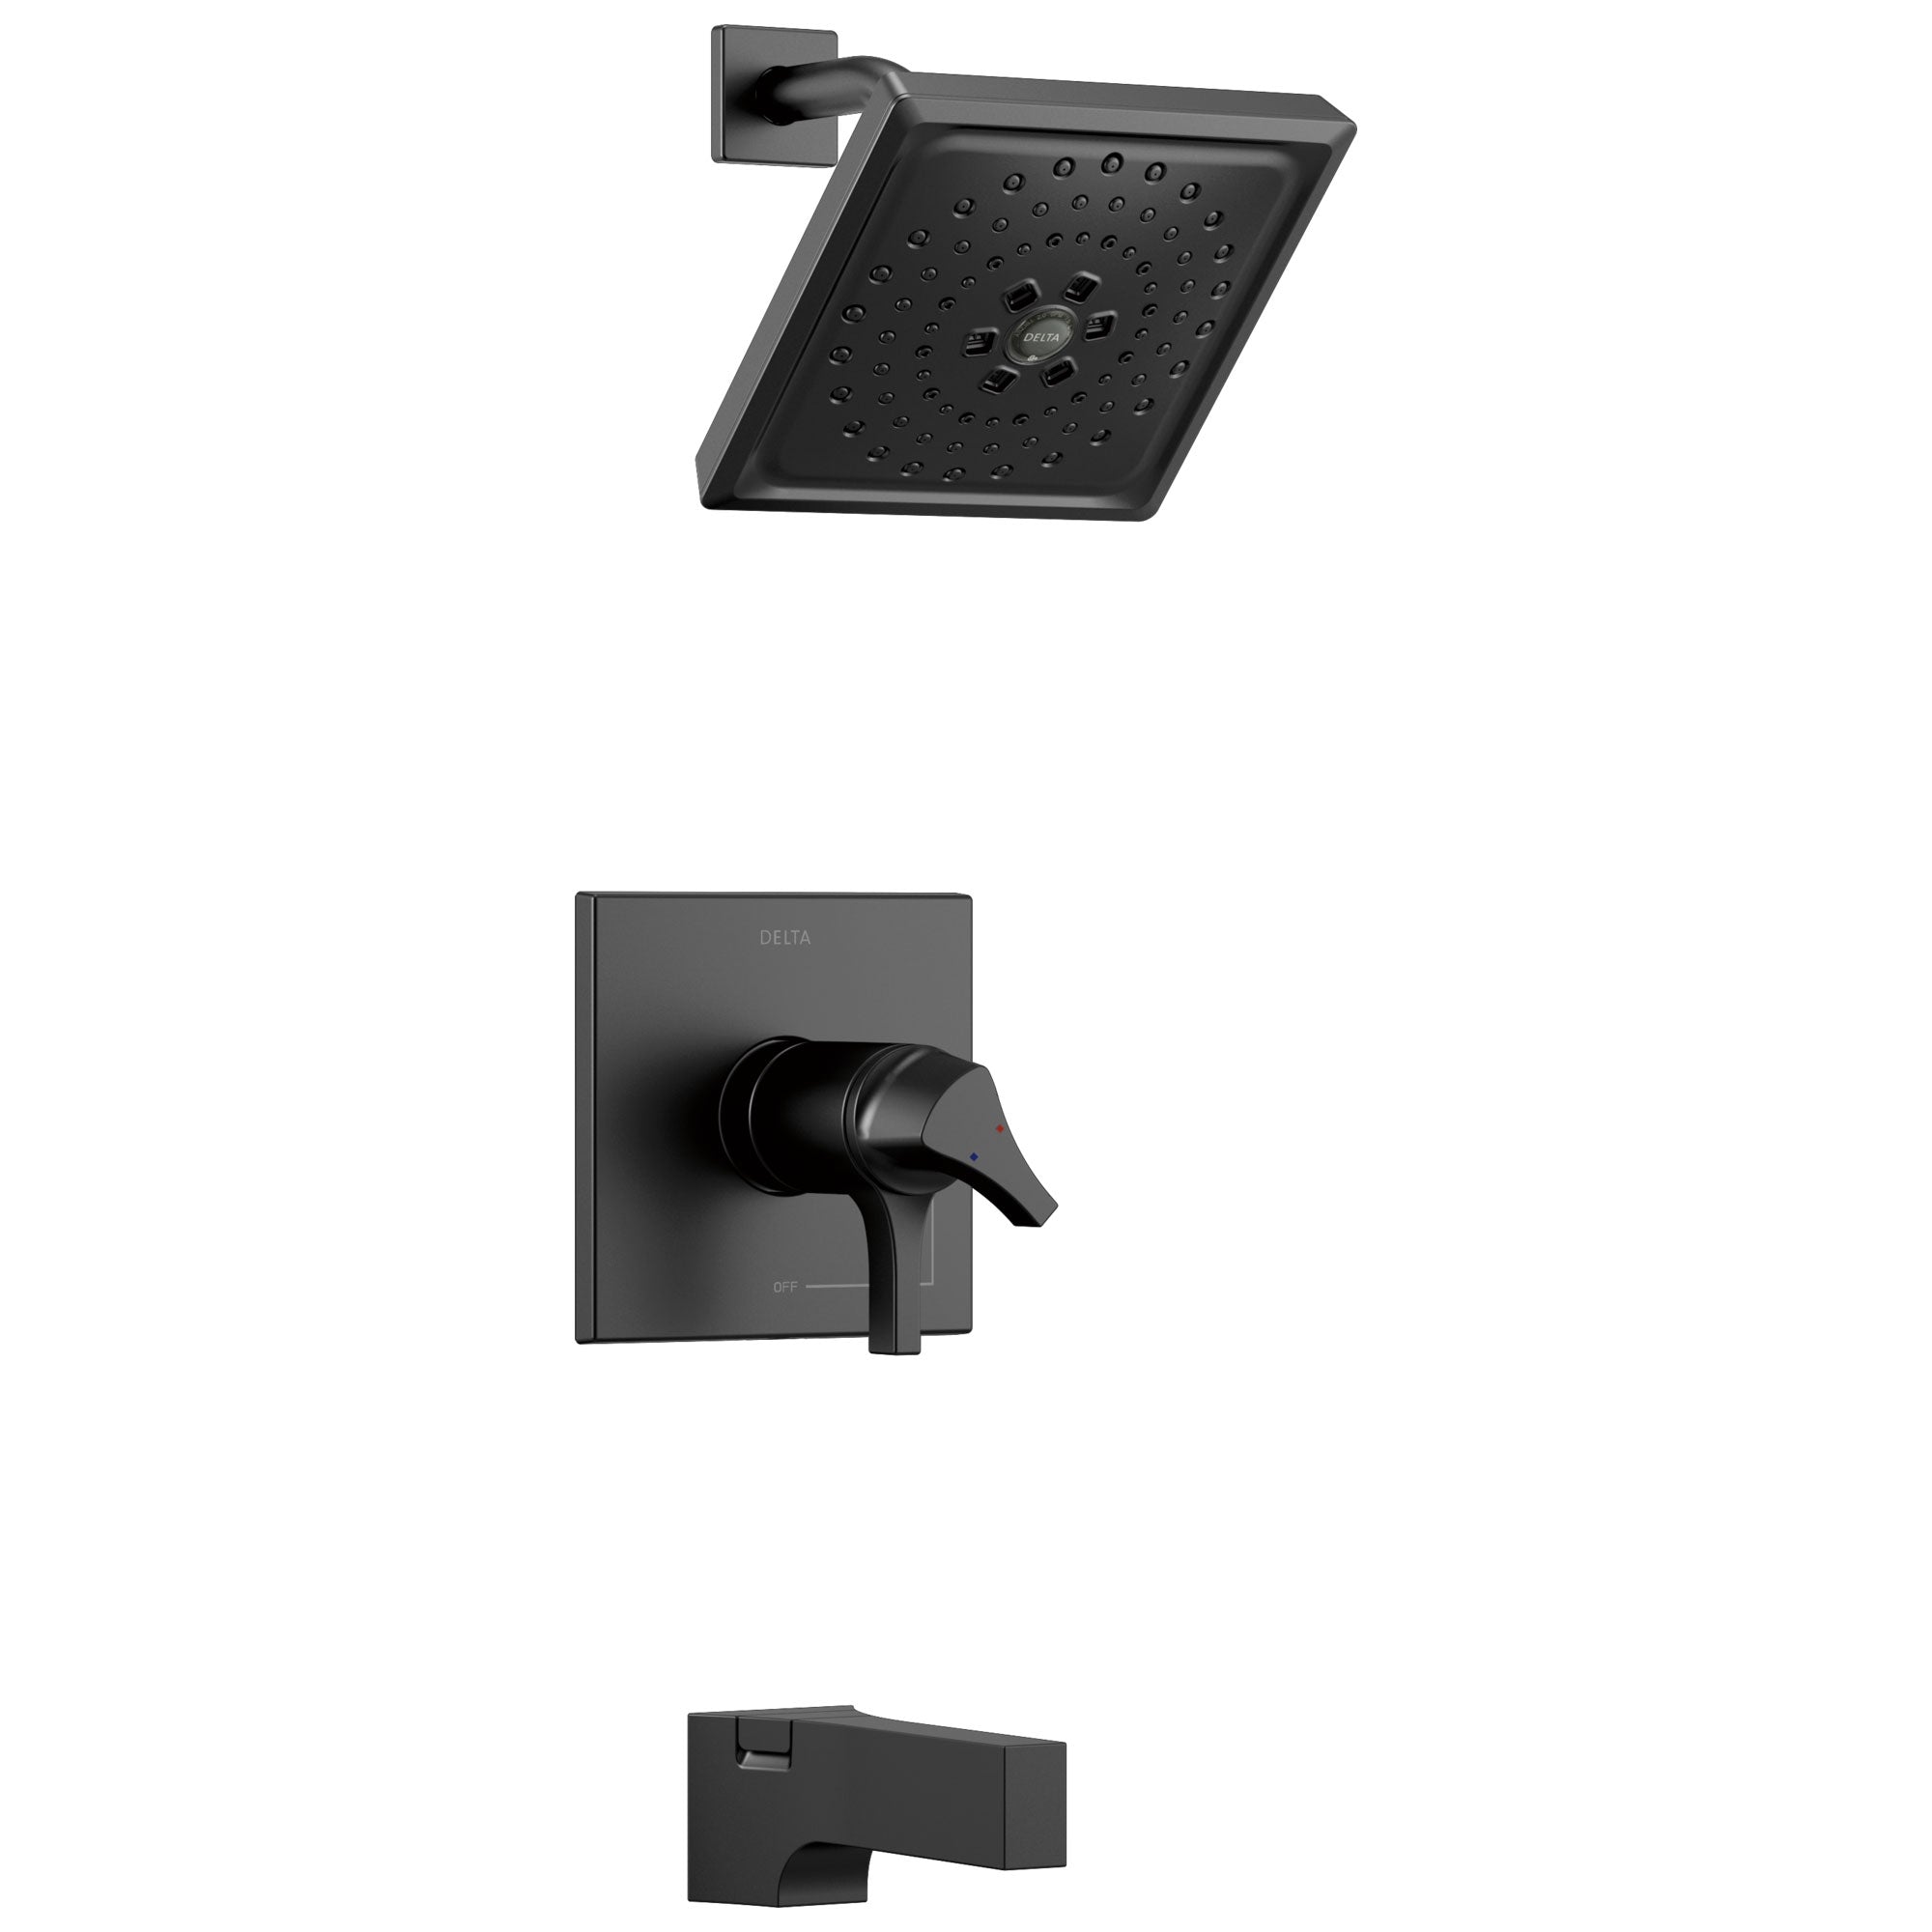 Delta Zura Matte Black Finish Thermostatic Tub and Shower Combination Faucet Includes Handles, Cartridge, and Rough-in Valve without Stops D3624V